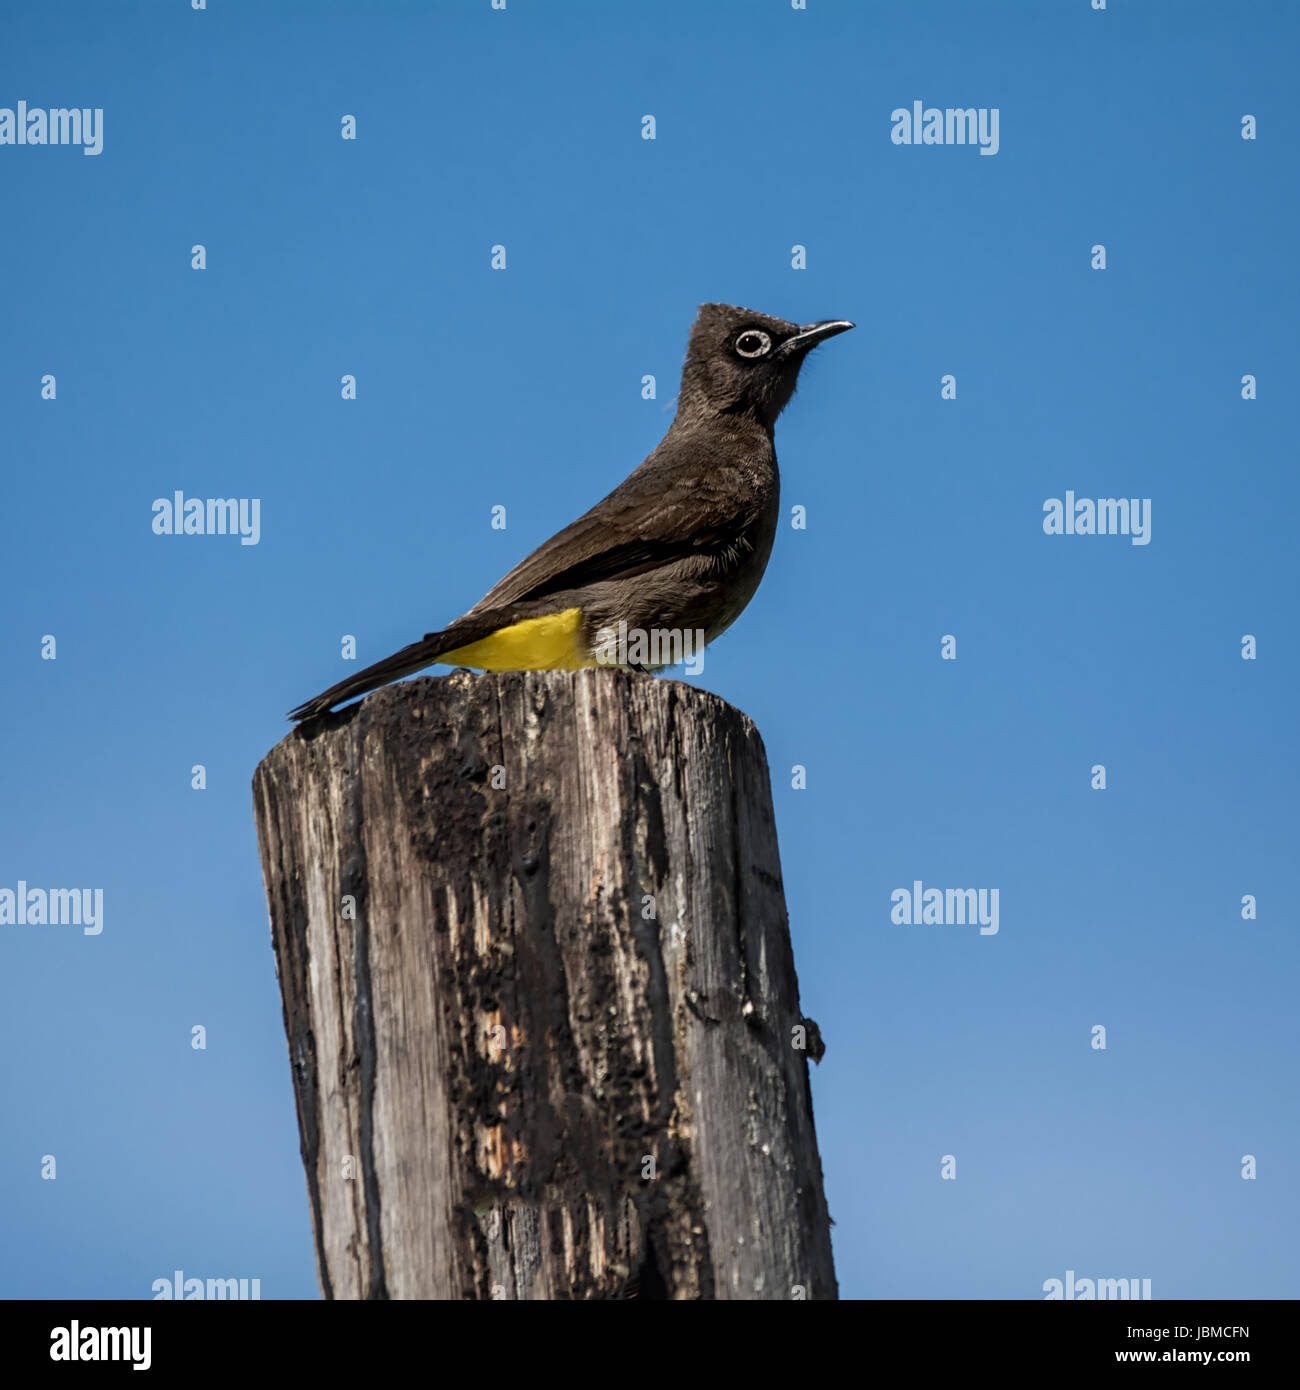 A Cape Bulbul perched on a branch in Southern Africa Stock Photo